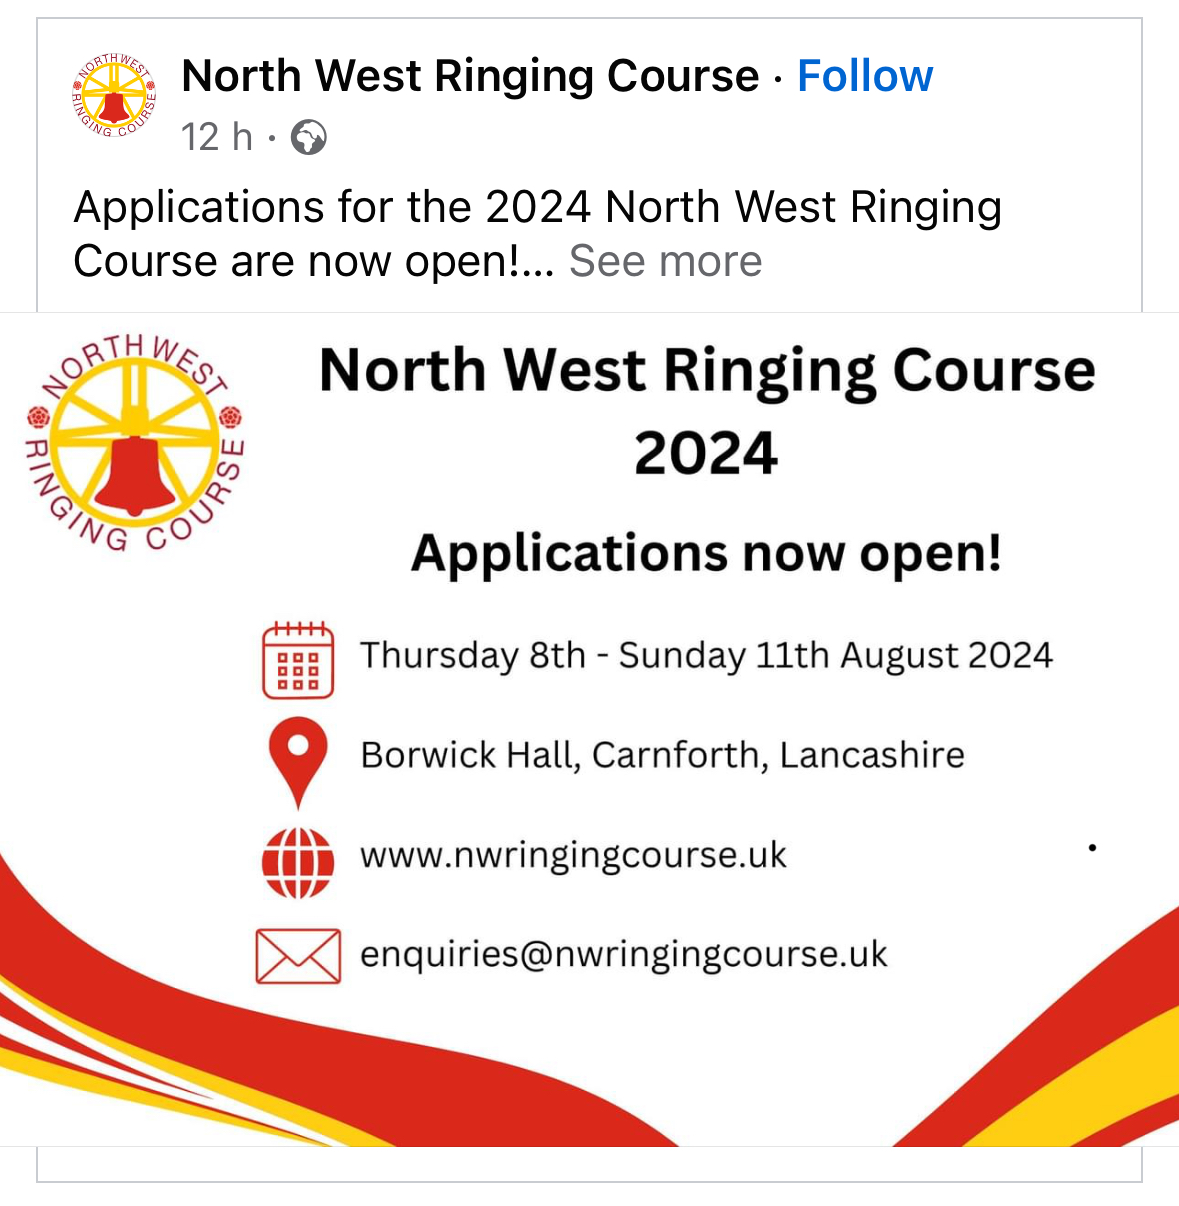 North West Ringing Course 2024